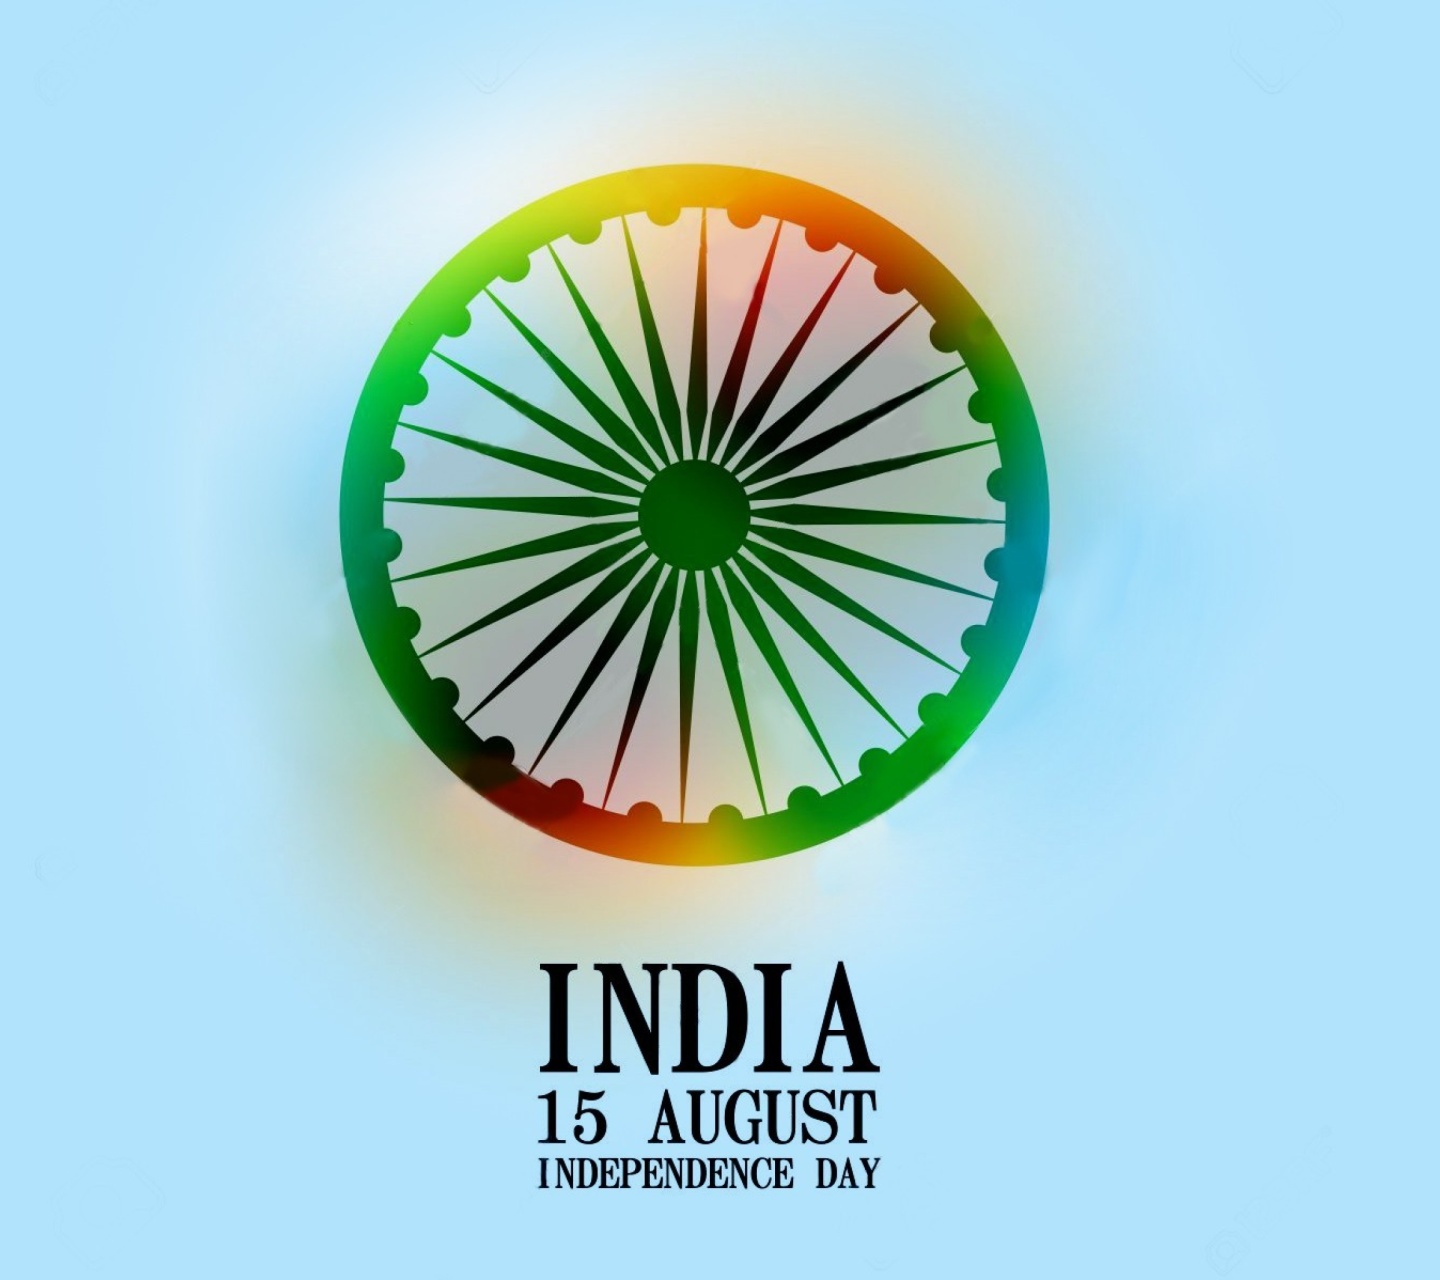 India Independence Day 15 August screenshot #1 1440x1280